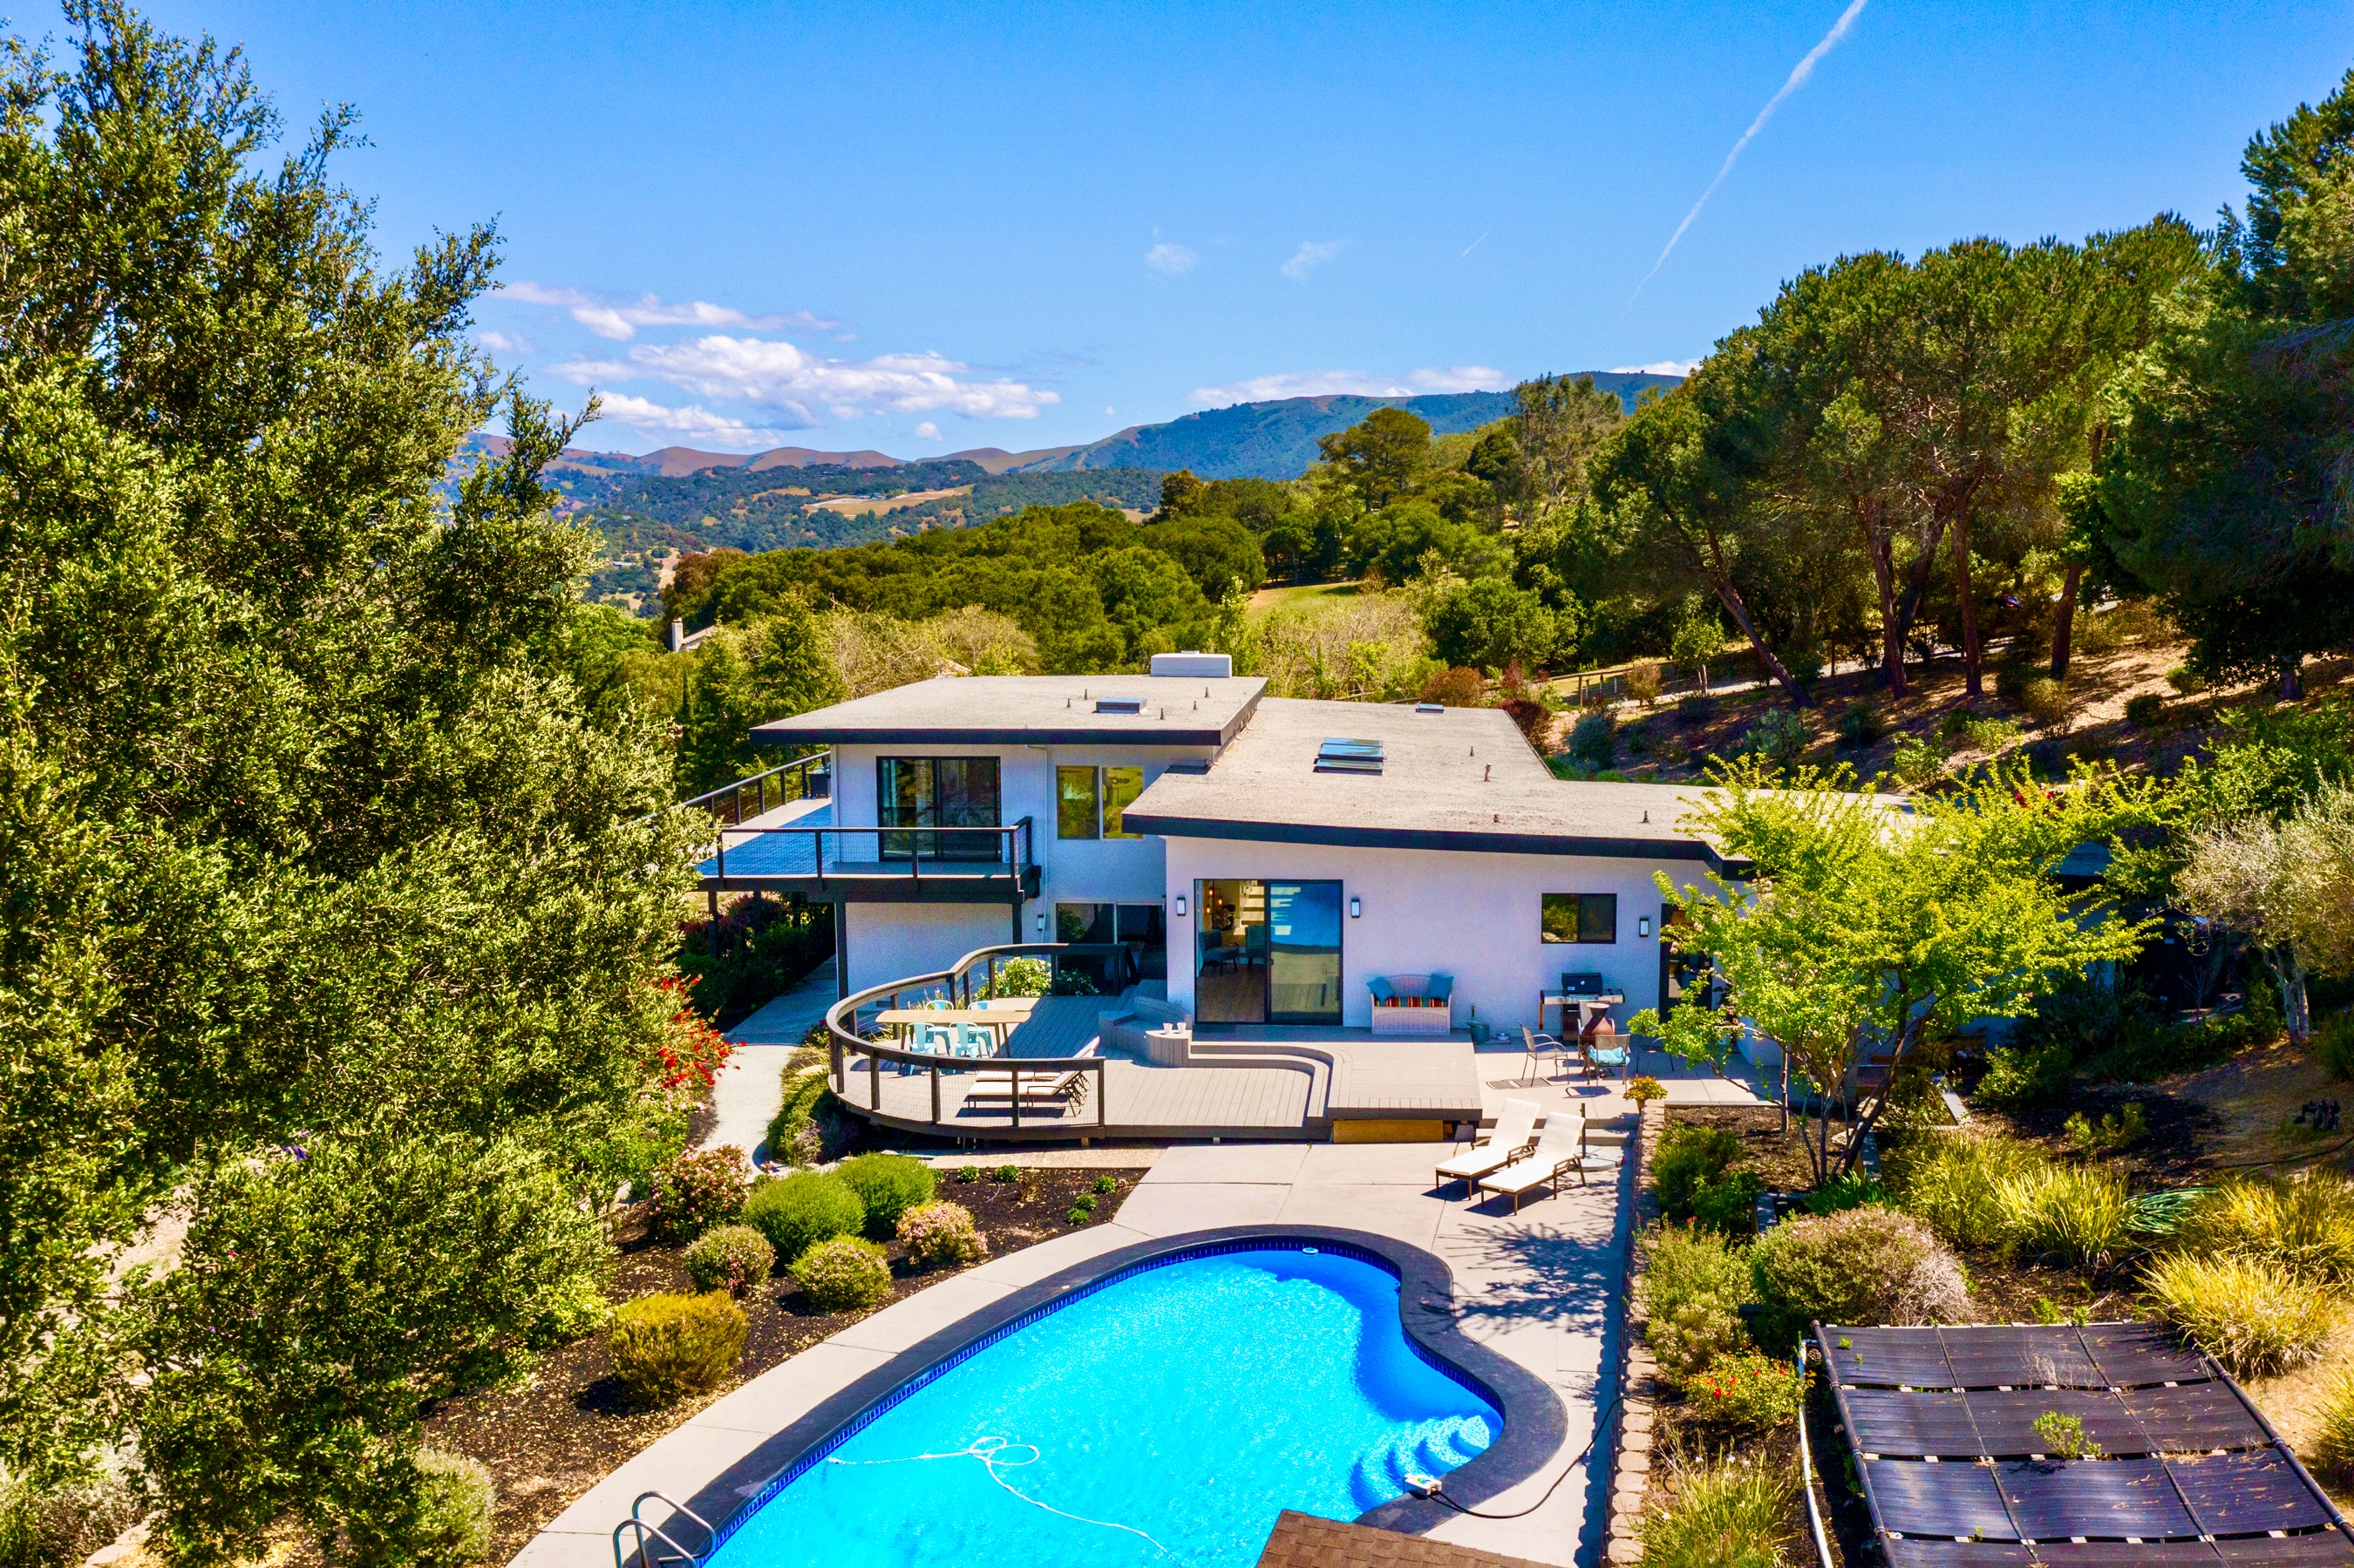 MV41 Carmel Valley 5 Bedroom Home with Pool close to the Village